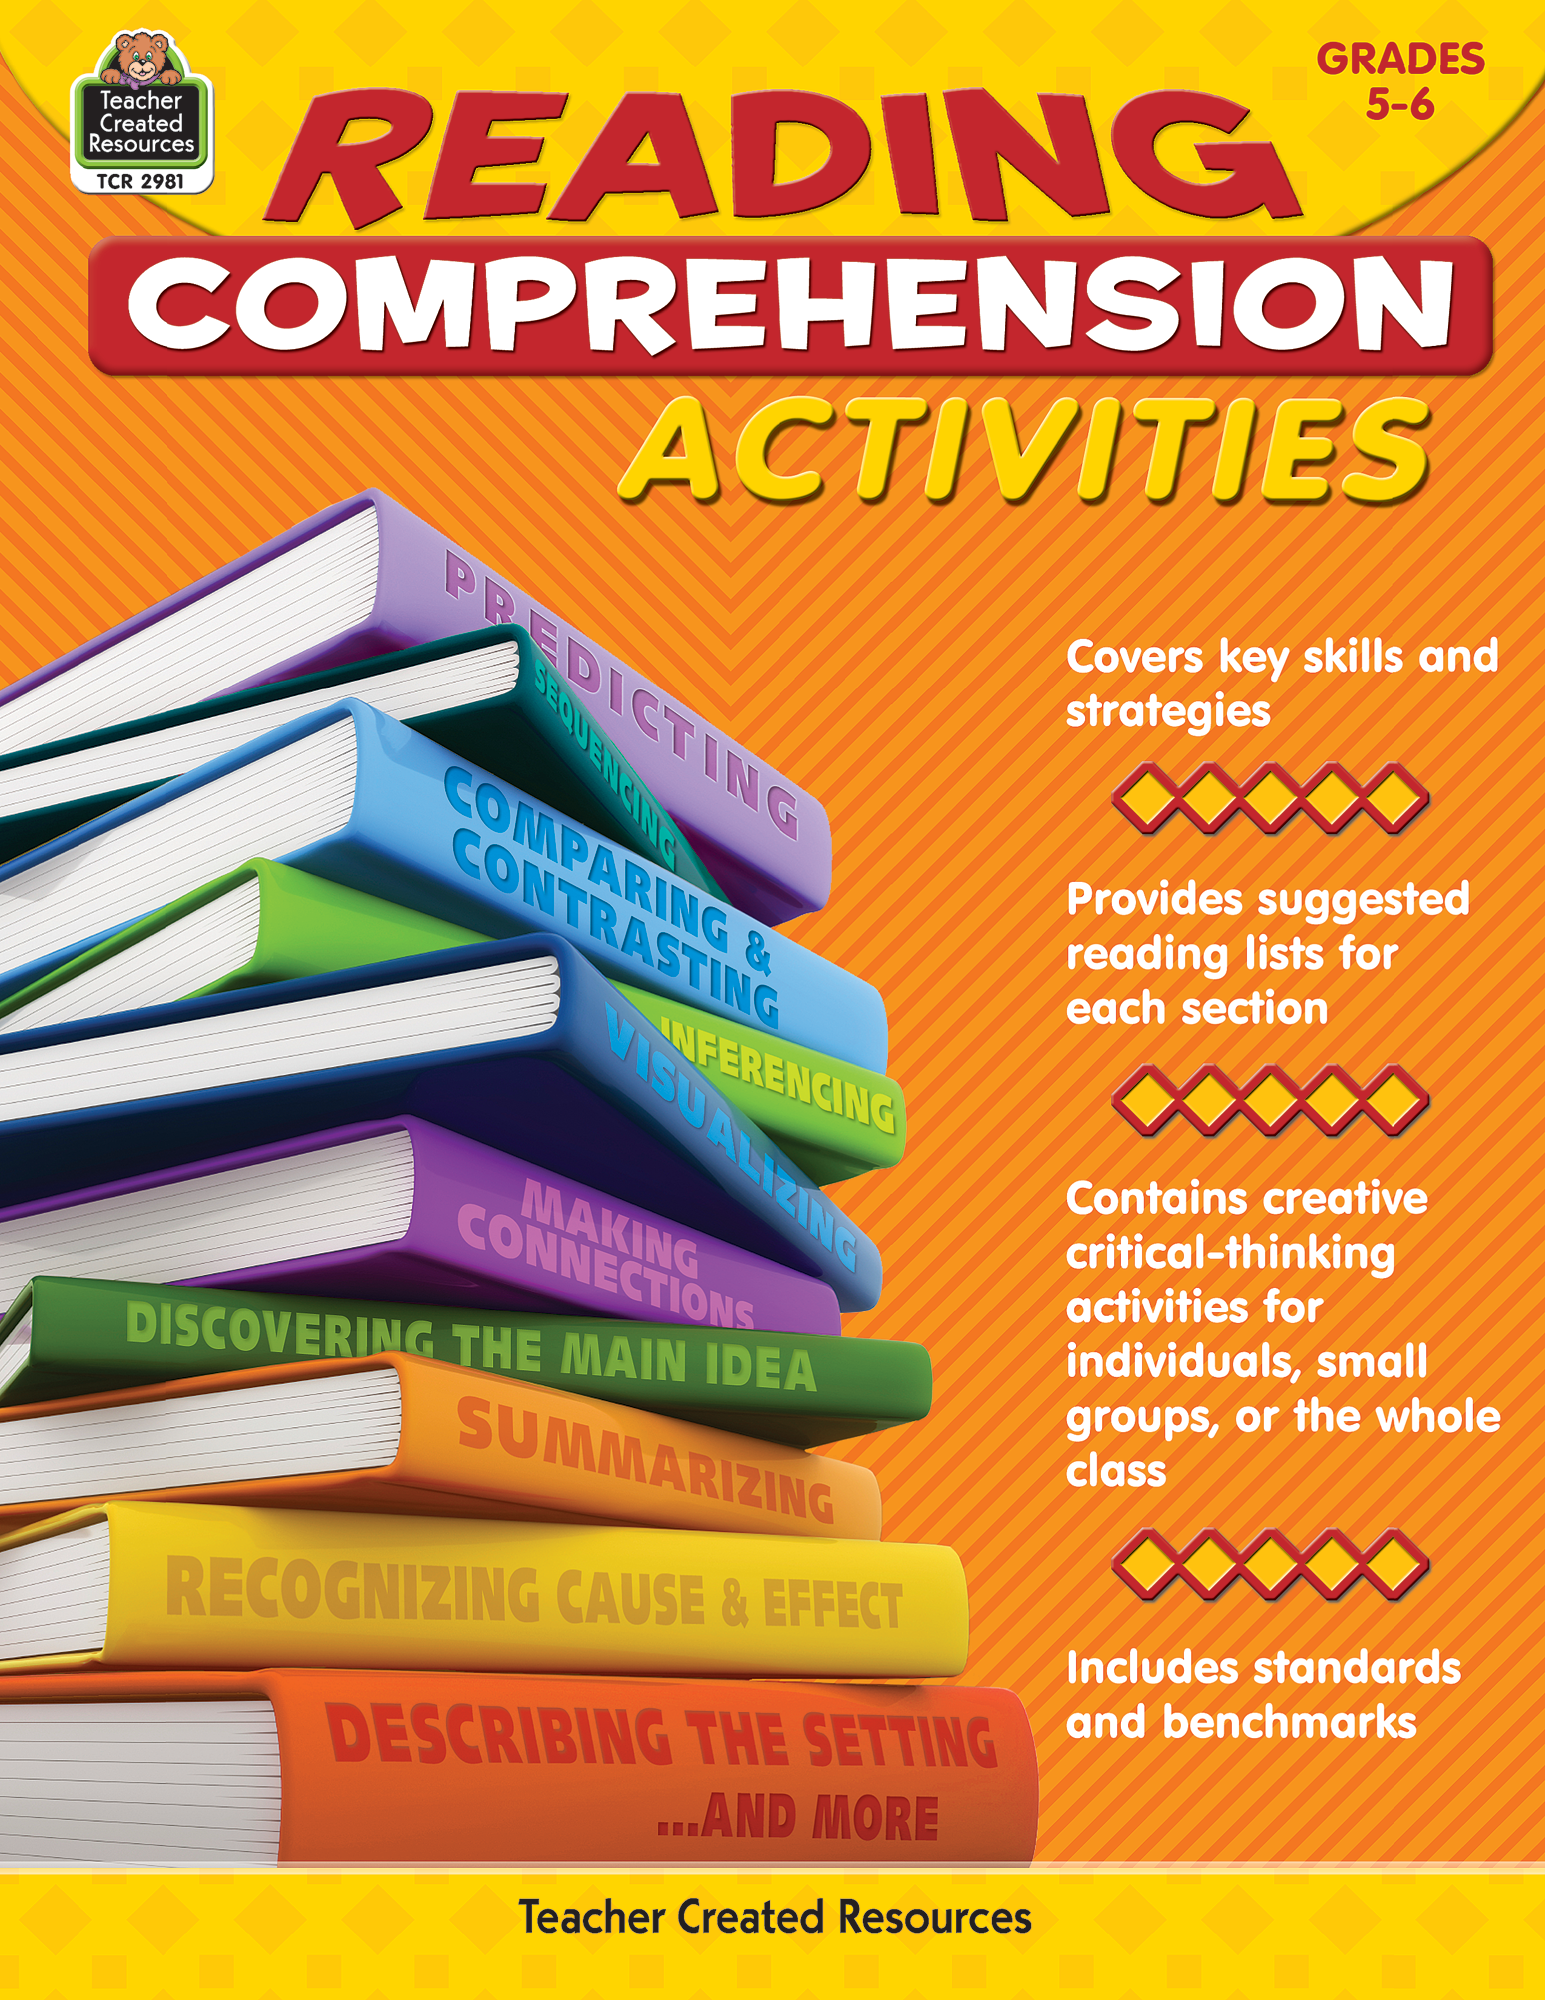 Reading Comprehension Activities Grade 5-6 - TCR2981 | Teacher Created